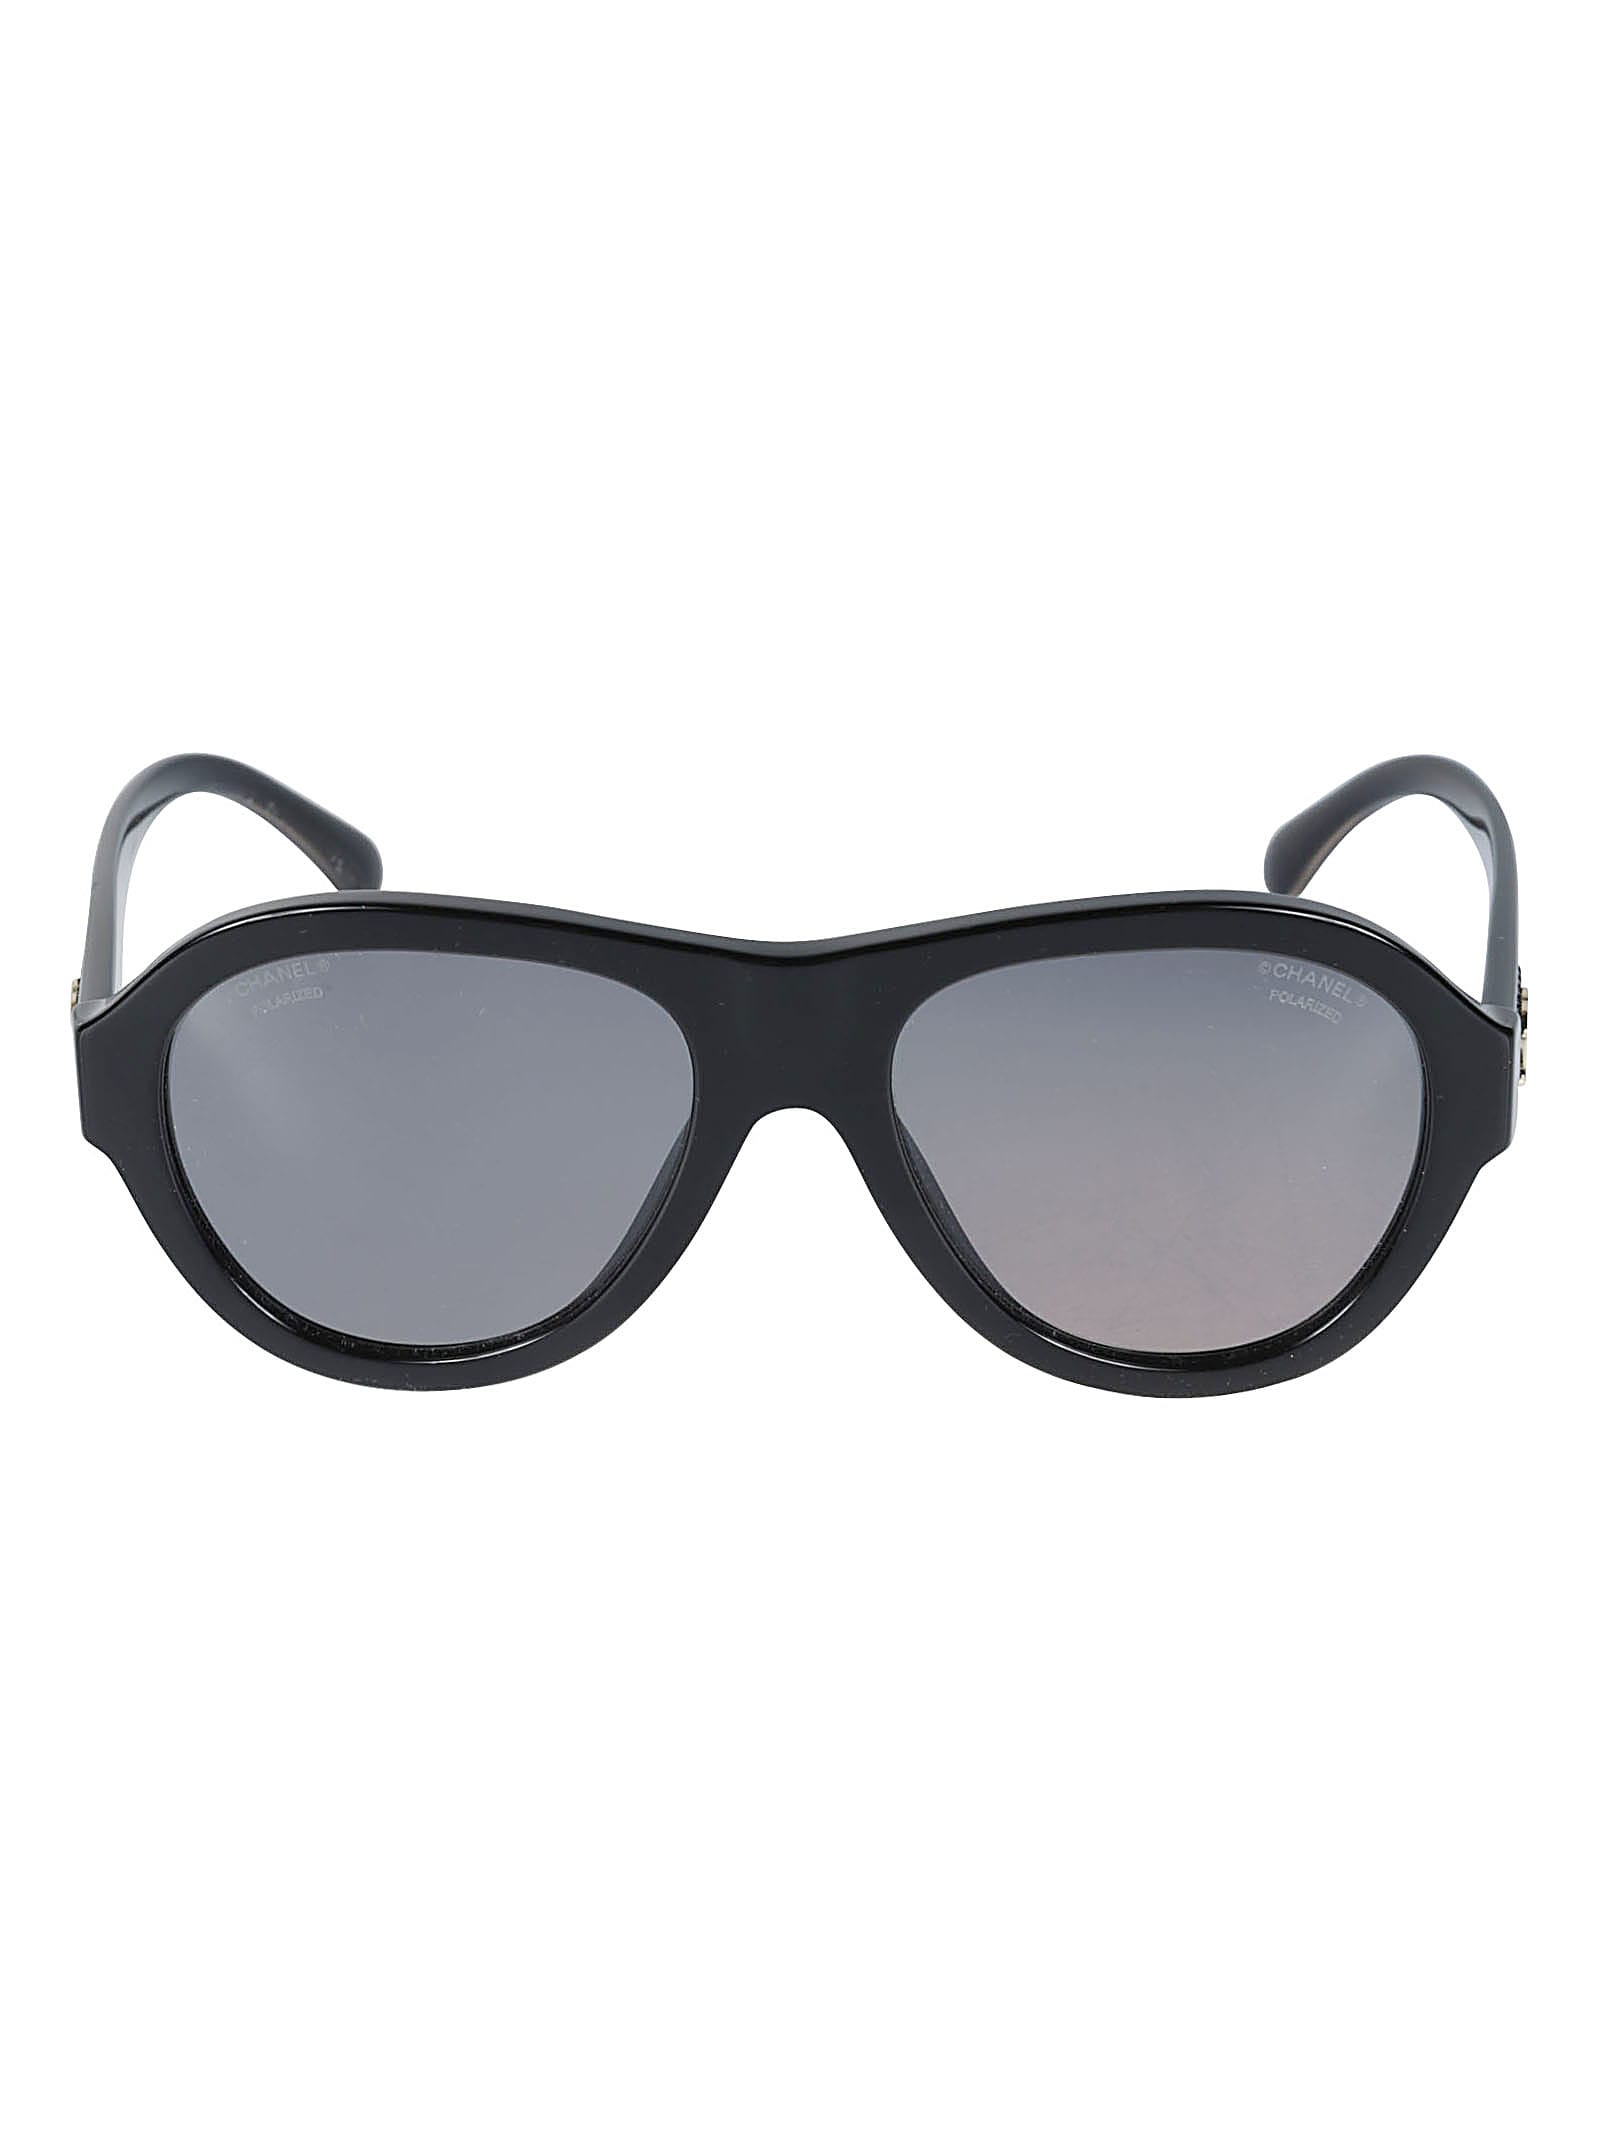 Chanel Curved Frame Sunglasses